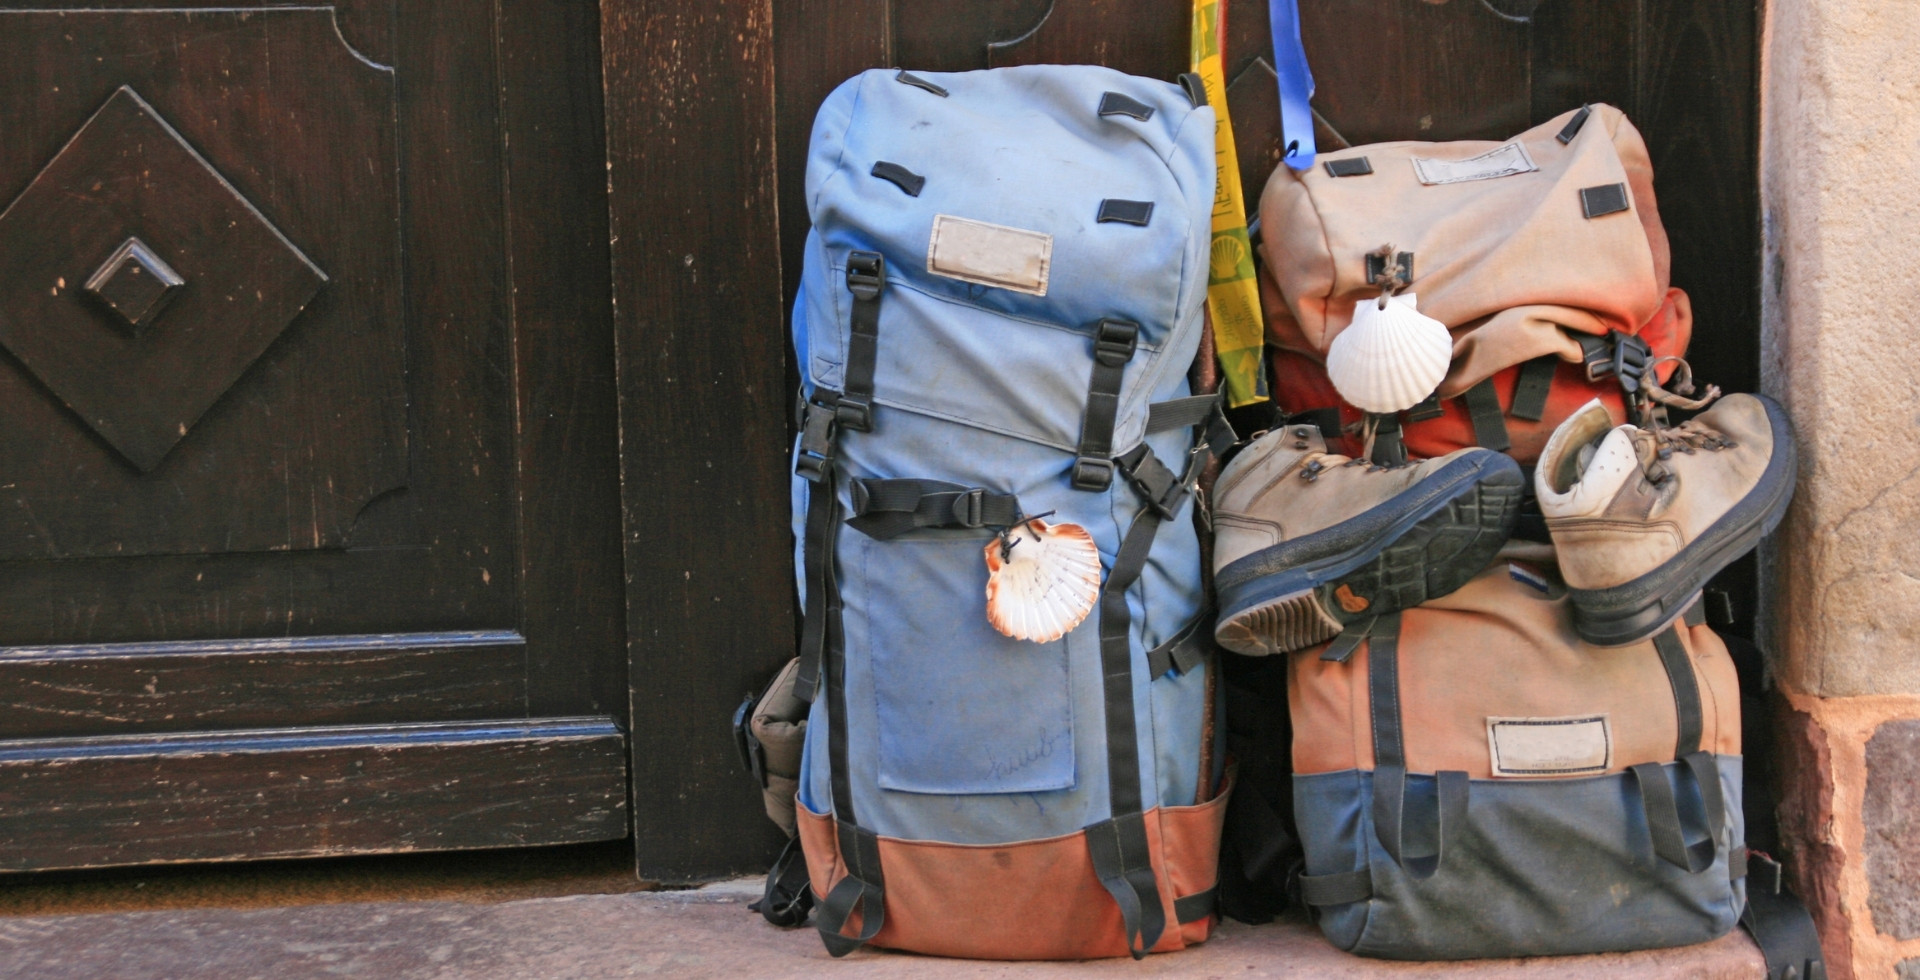 Nepal Trekking Gear Checklist, Backpack Essential Suggestion for